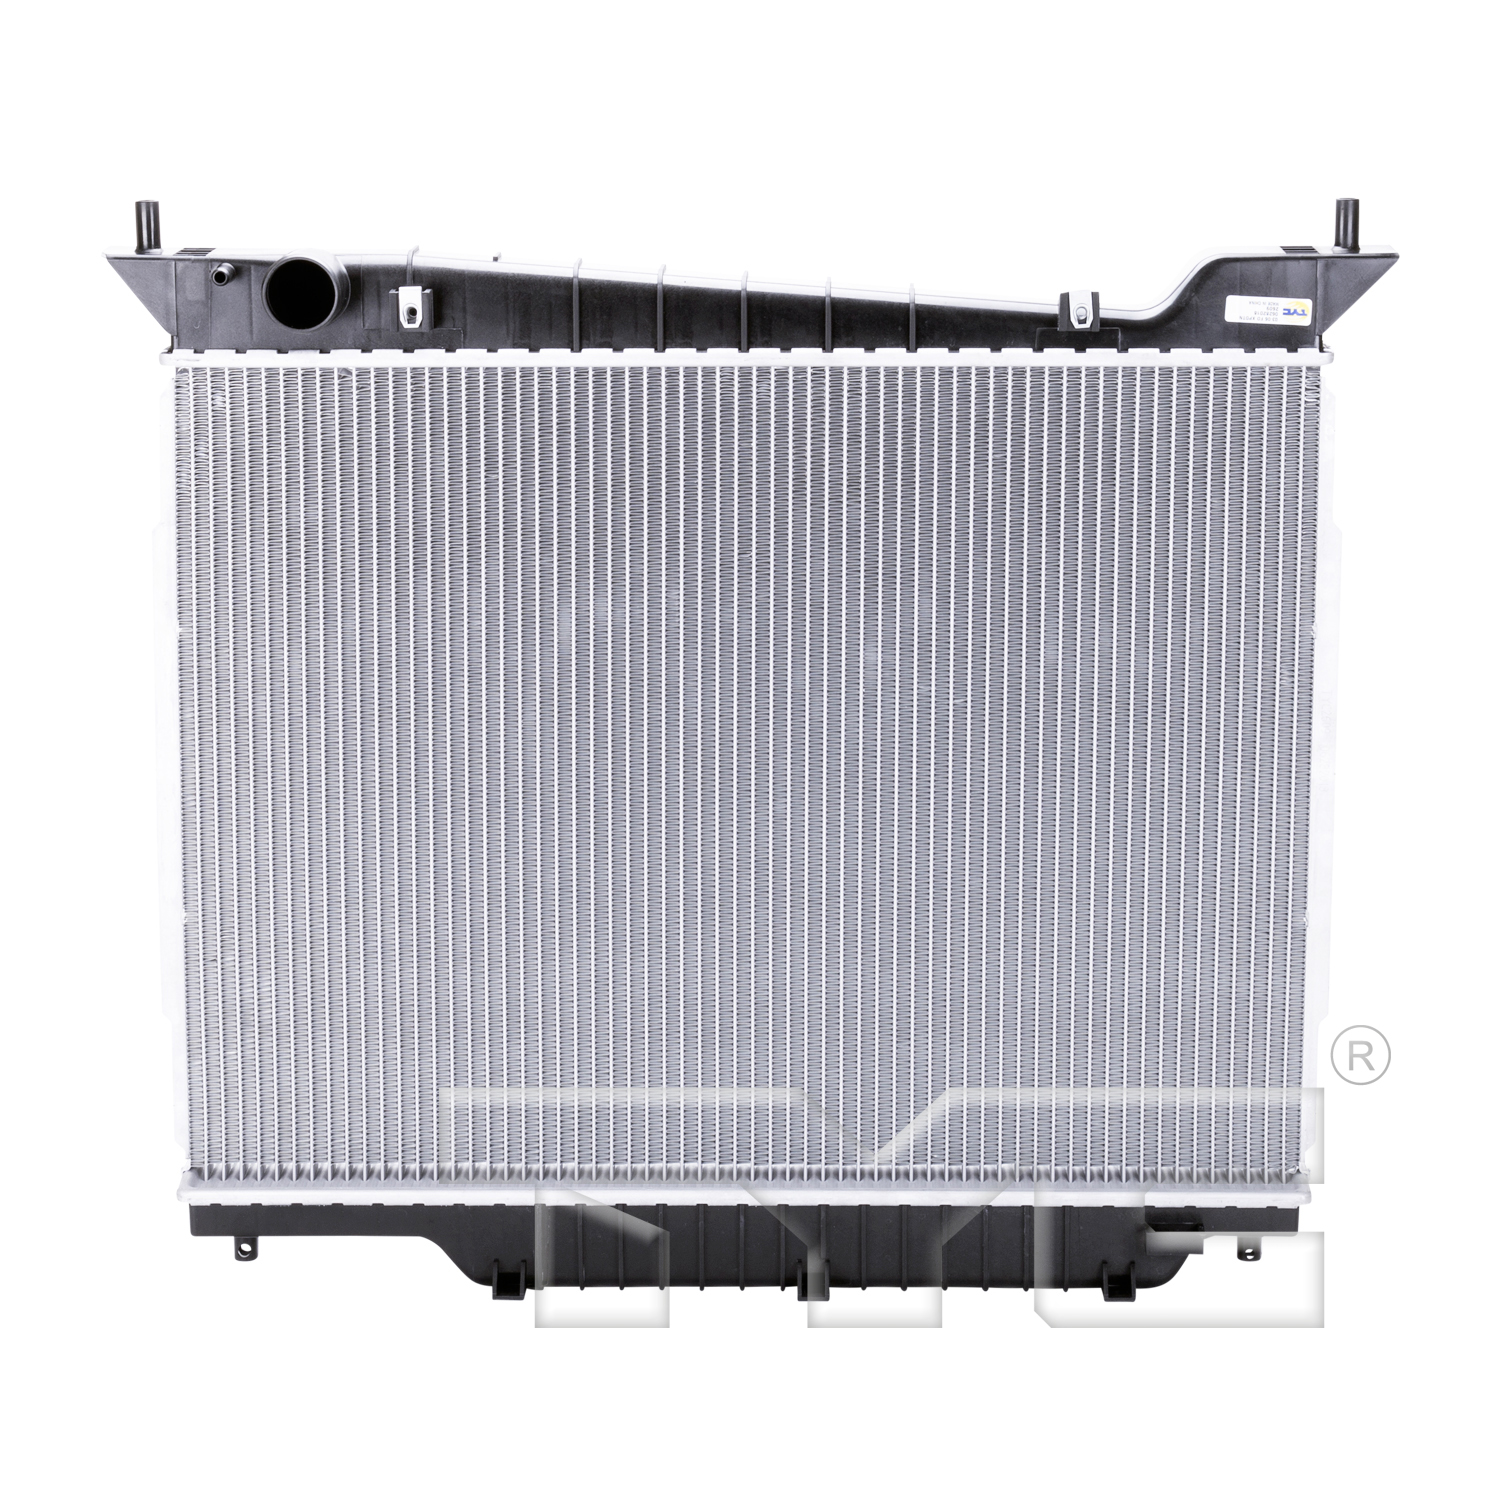 Aftermarket RADIATORS for FORD - EXPEDITION, EXPEDITION,03-06,Radiator assembly